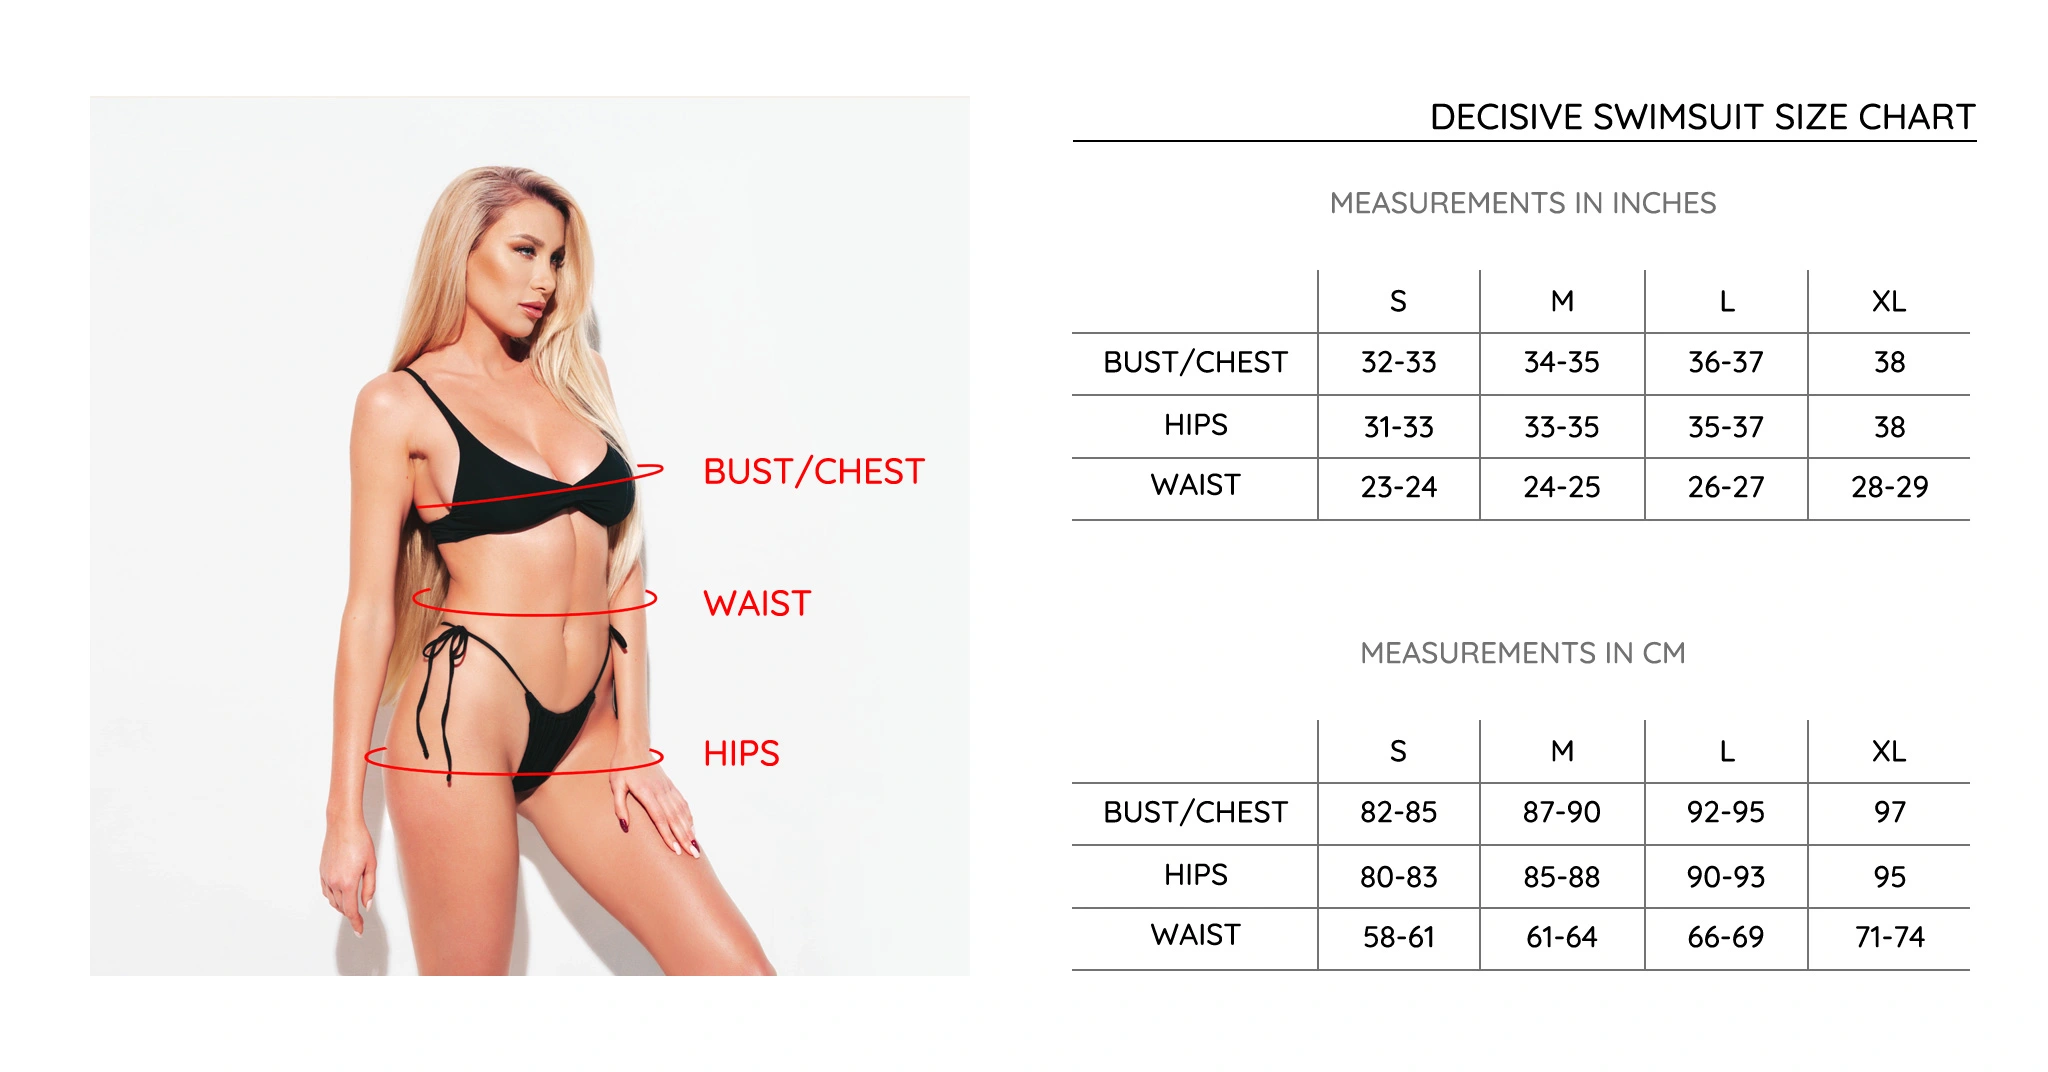 Swimsuit size guide info-graph